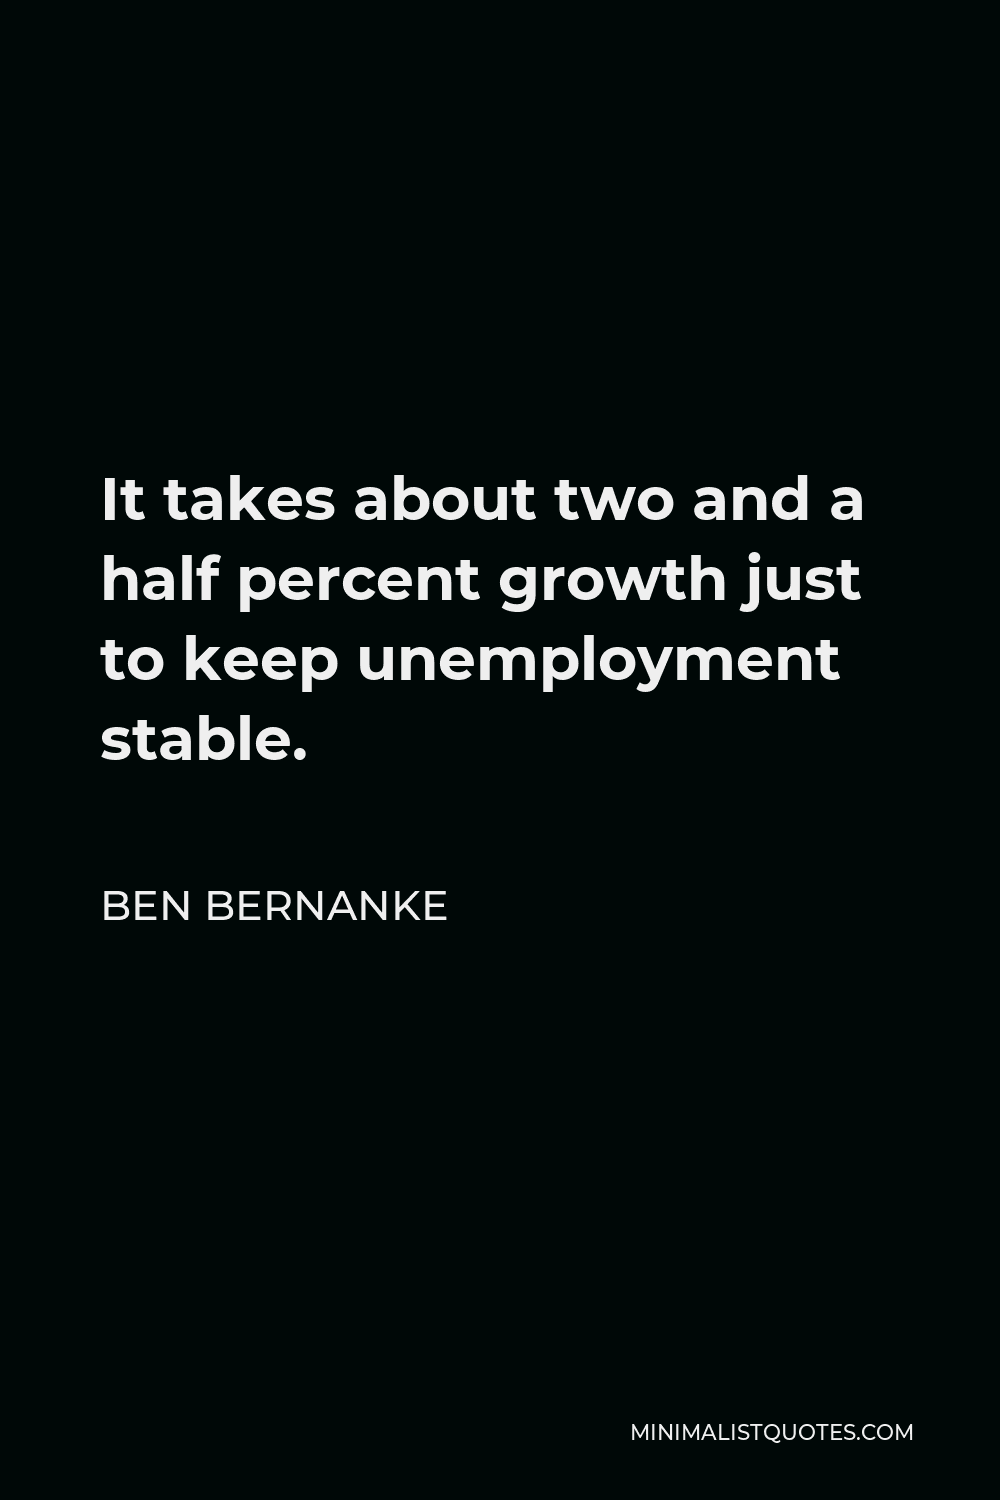 Ben Bernanke Quote - It takes about two and a half percent growth just to keep unemployment stable.